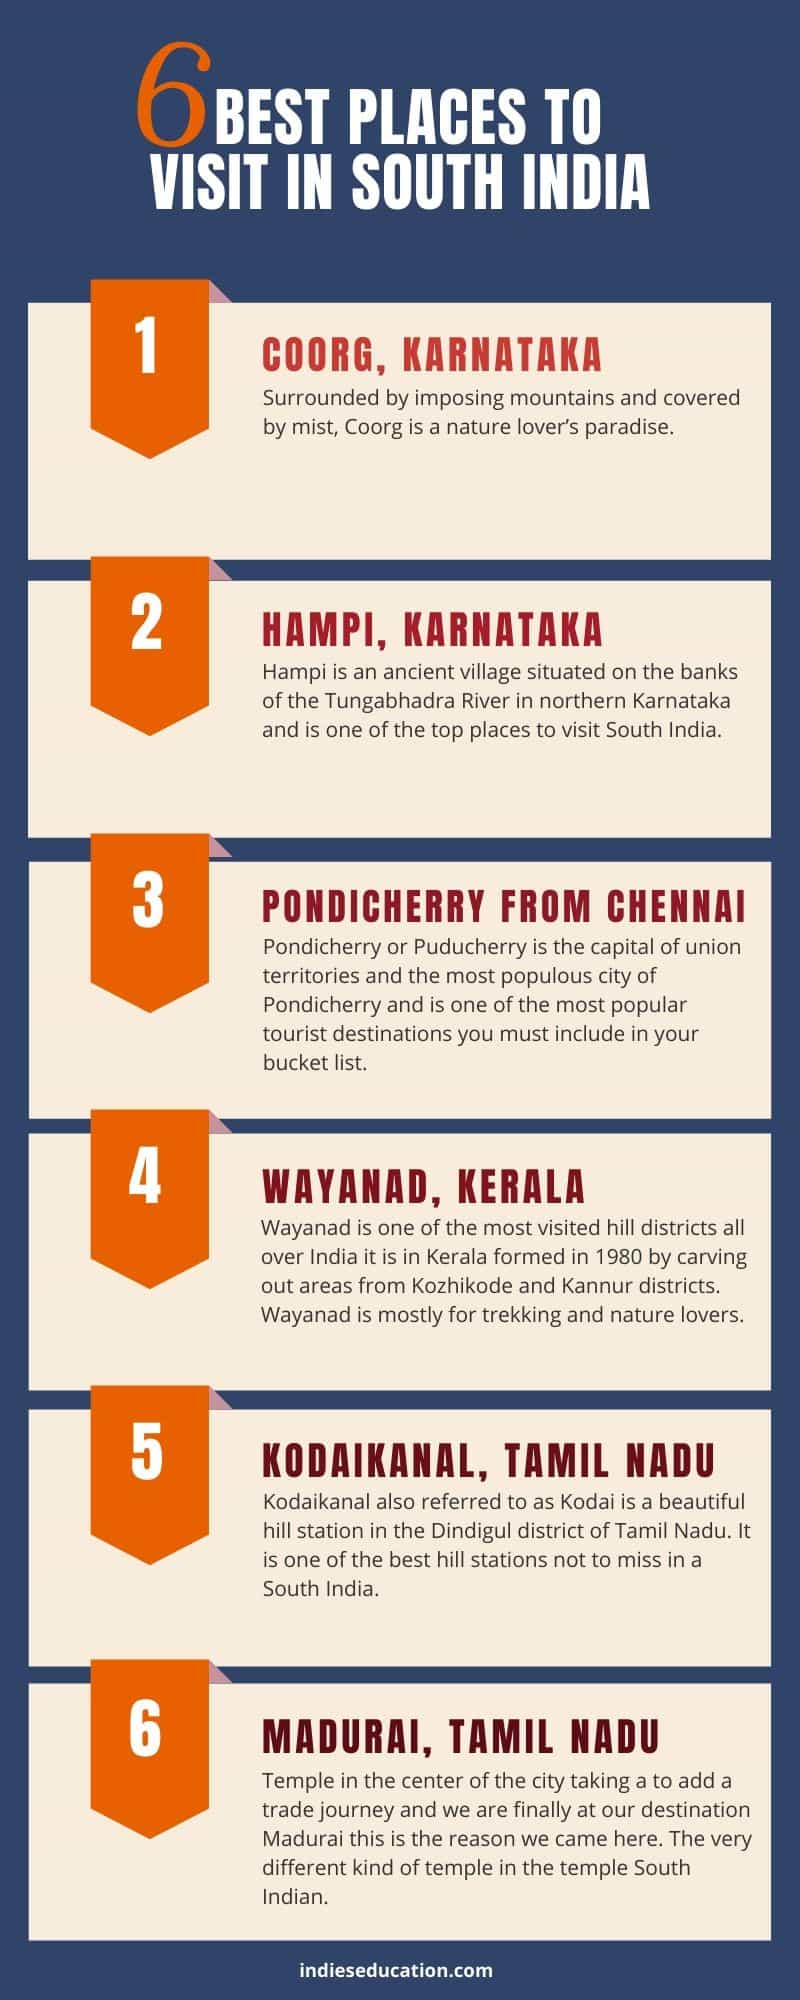 best-places-to-visit-in-south-india